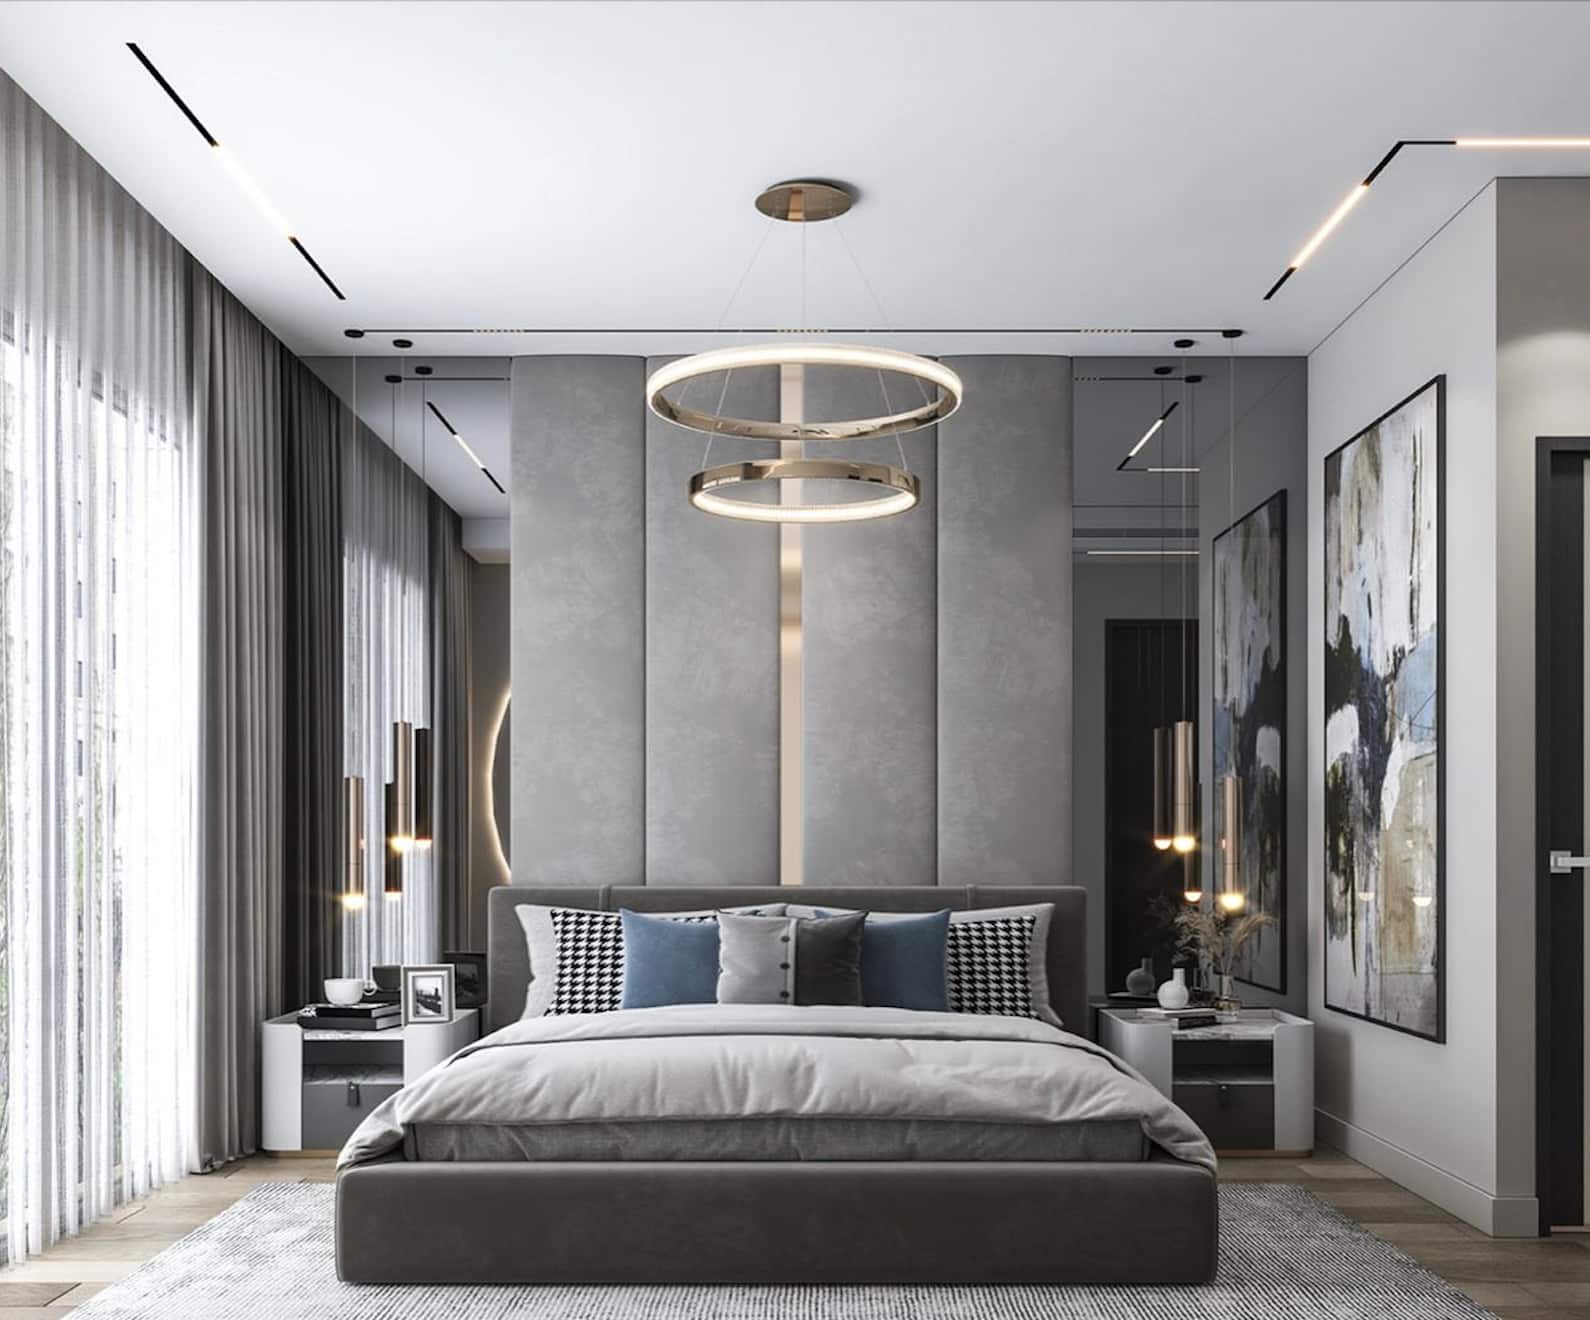 Bedroom Furniture 2023, bed room store 2023, Best Furniture Ideas 2024, Luxury BedrooM In CaIro, Luxury BedrooMs desIgn 2024, Modern BedrooMs Egypt, Furniture images cairo, The Best Furniture catalogue 2024